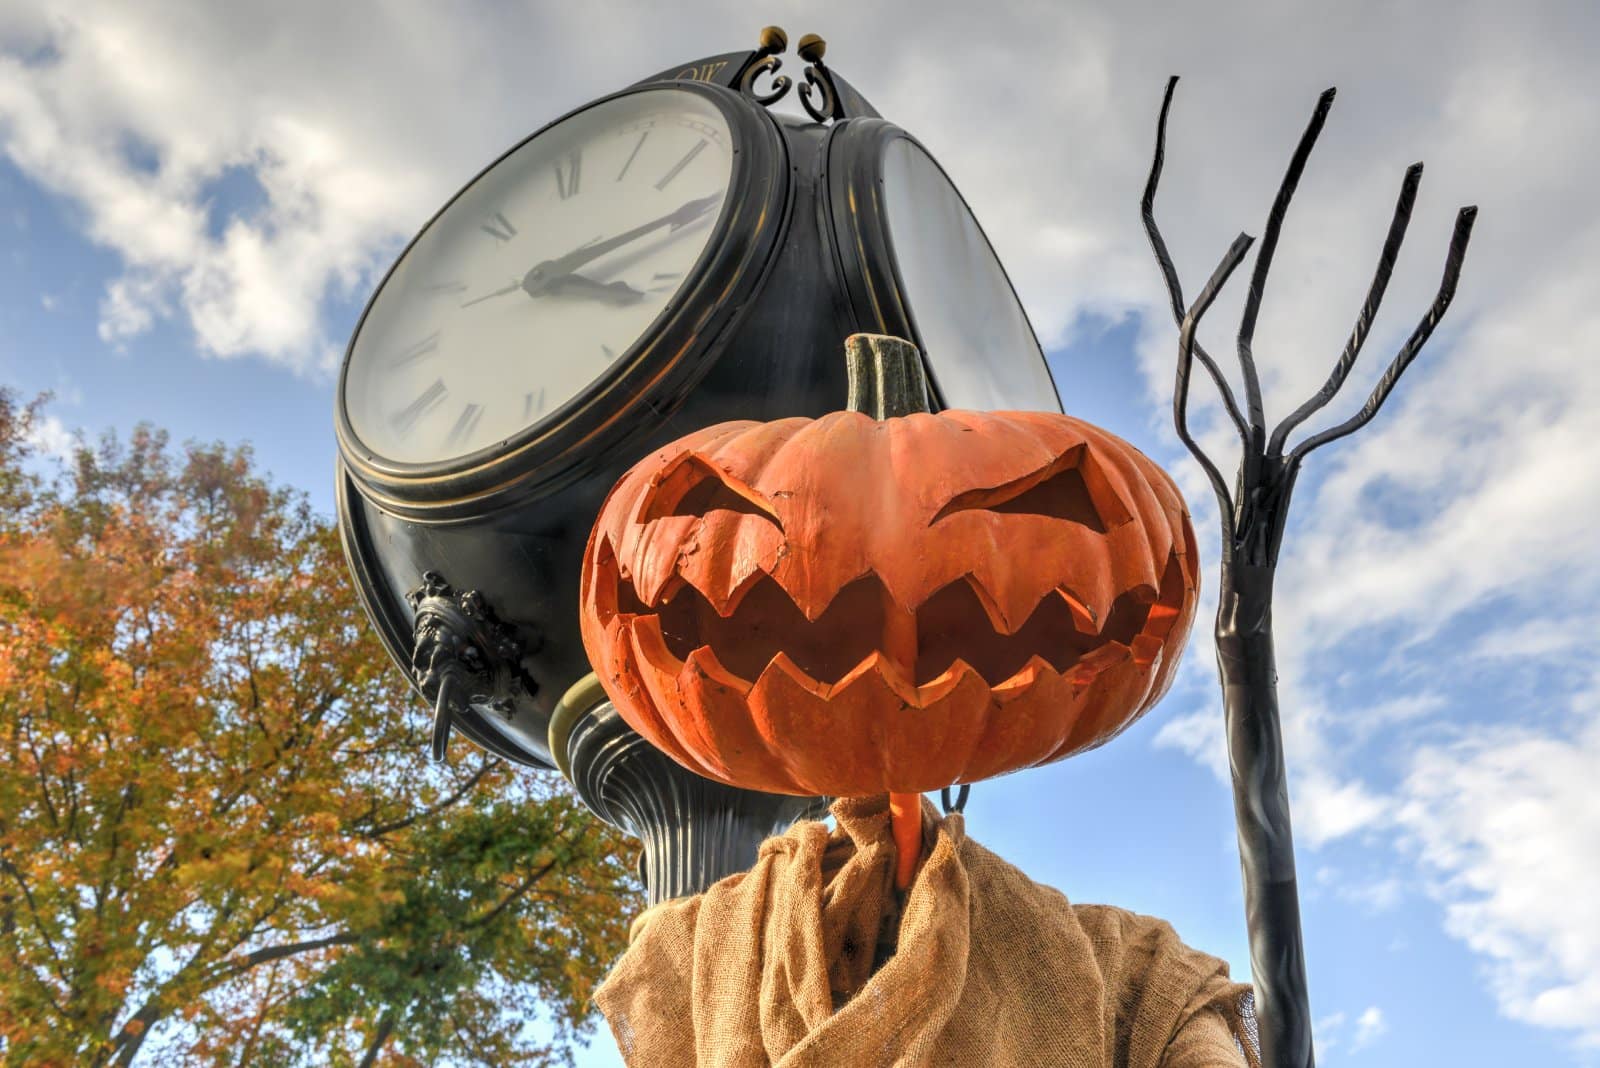 Image Credit: Shutterstock / Felix Lipov <p><span>Visit the town that inspired the legend of the Headless Horseman. It’s great for a spooky Halloween outing but can feel a tad commercial. Don’t miss the historic cemetery tour.</span></p>